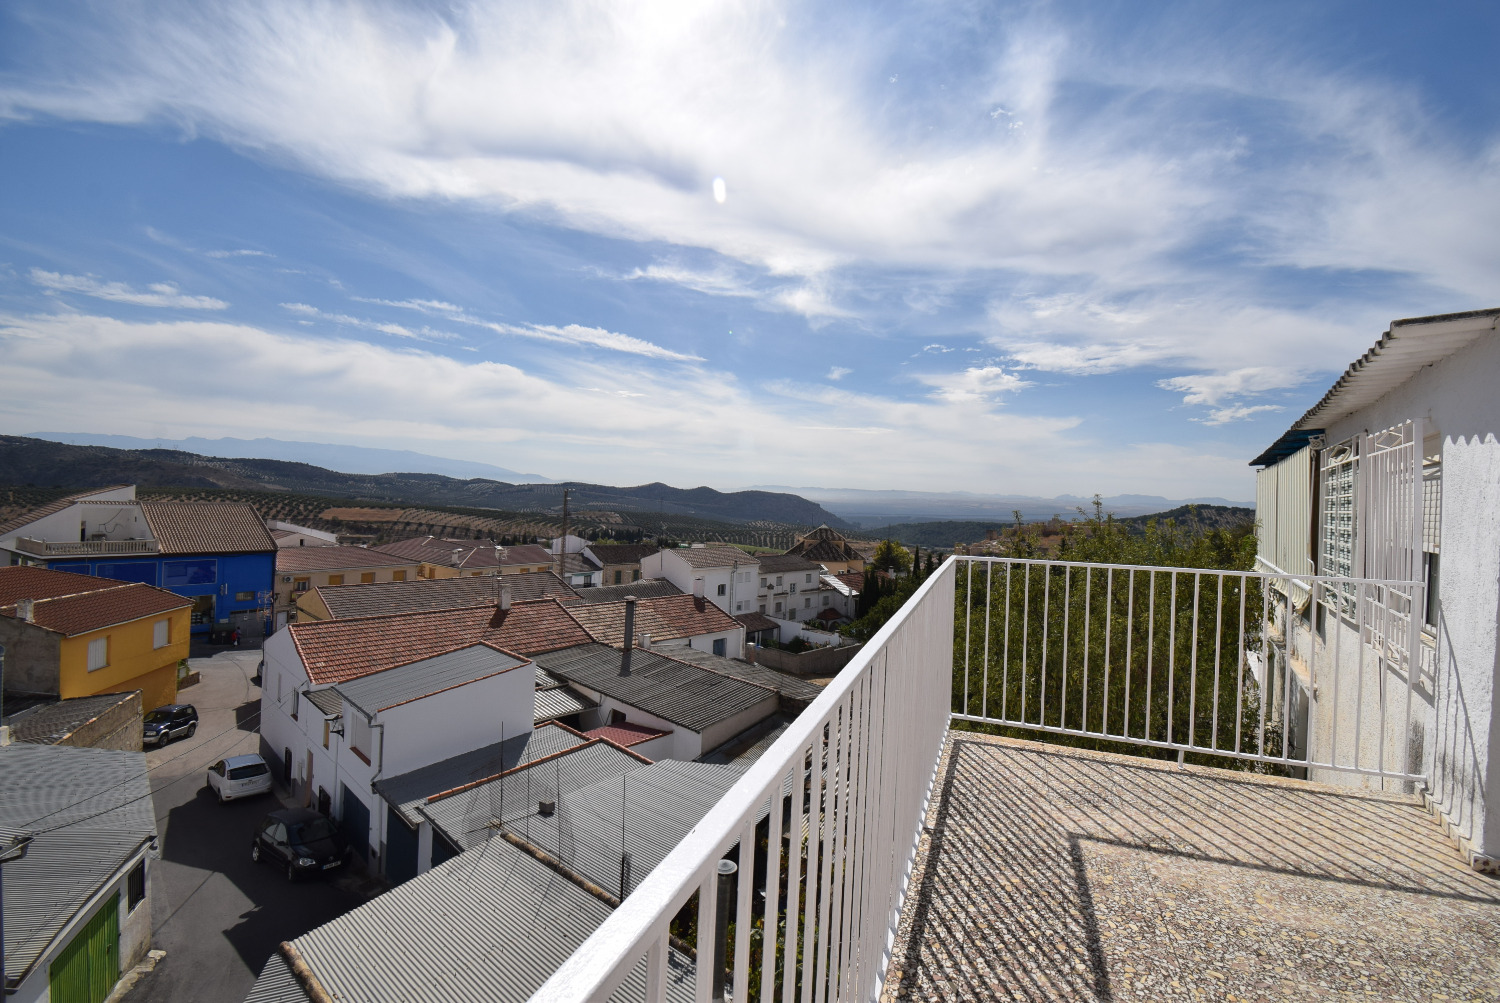 Detached townhouse with Amazing views